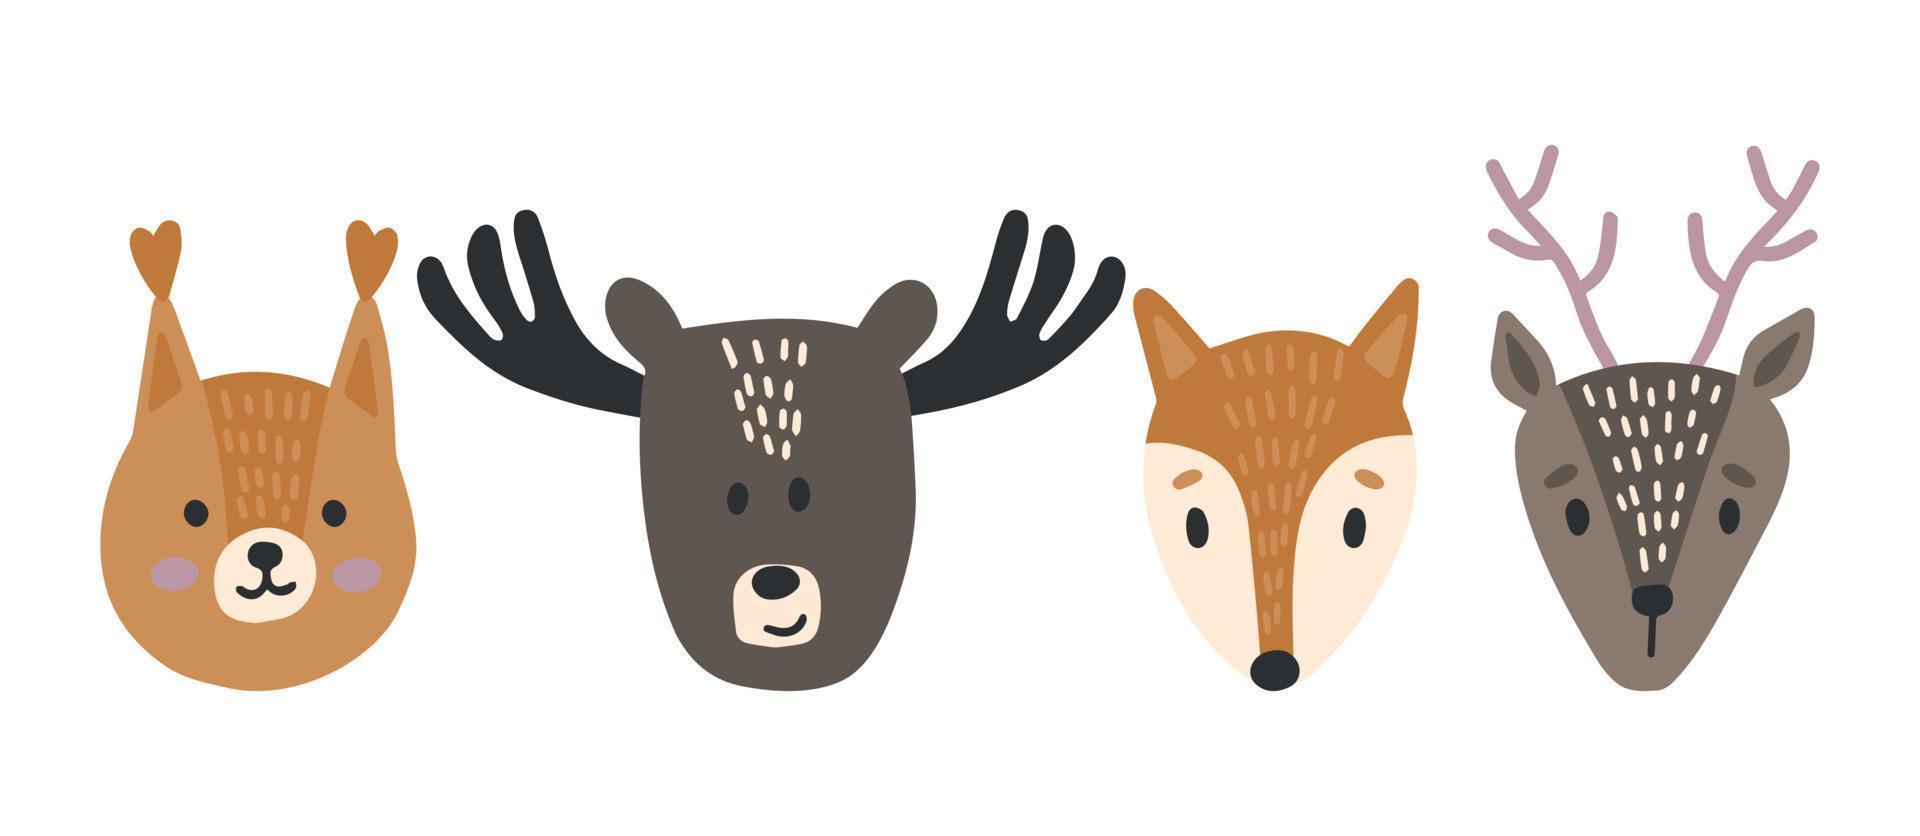 Cute vector print in Scandinavian style. Hand-drawn vector illustration for posters, postcards, T-shirts. Fox, squirrel, moose, deer.